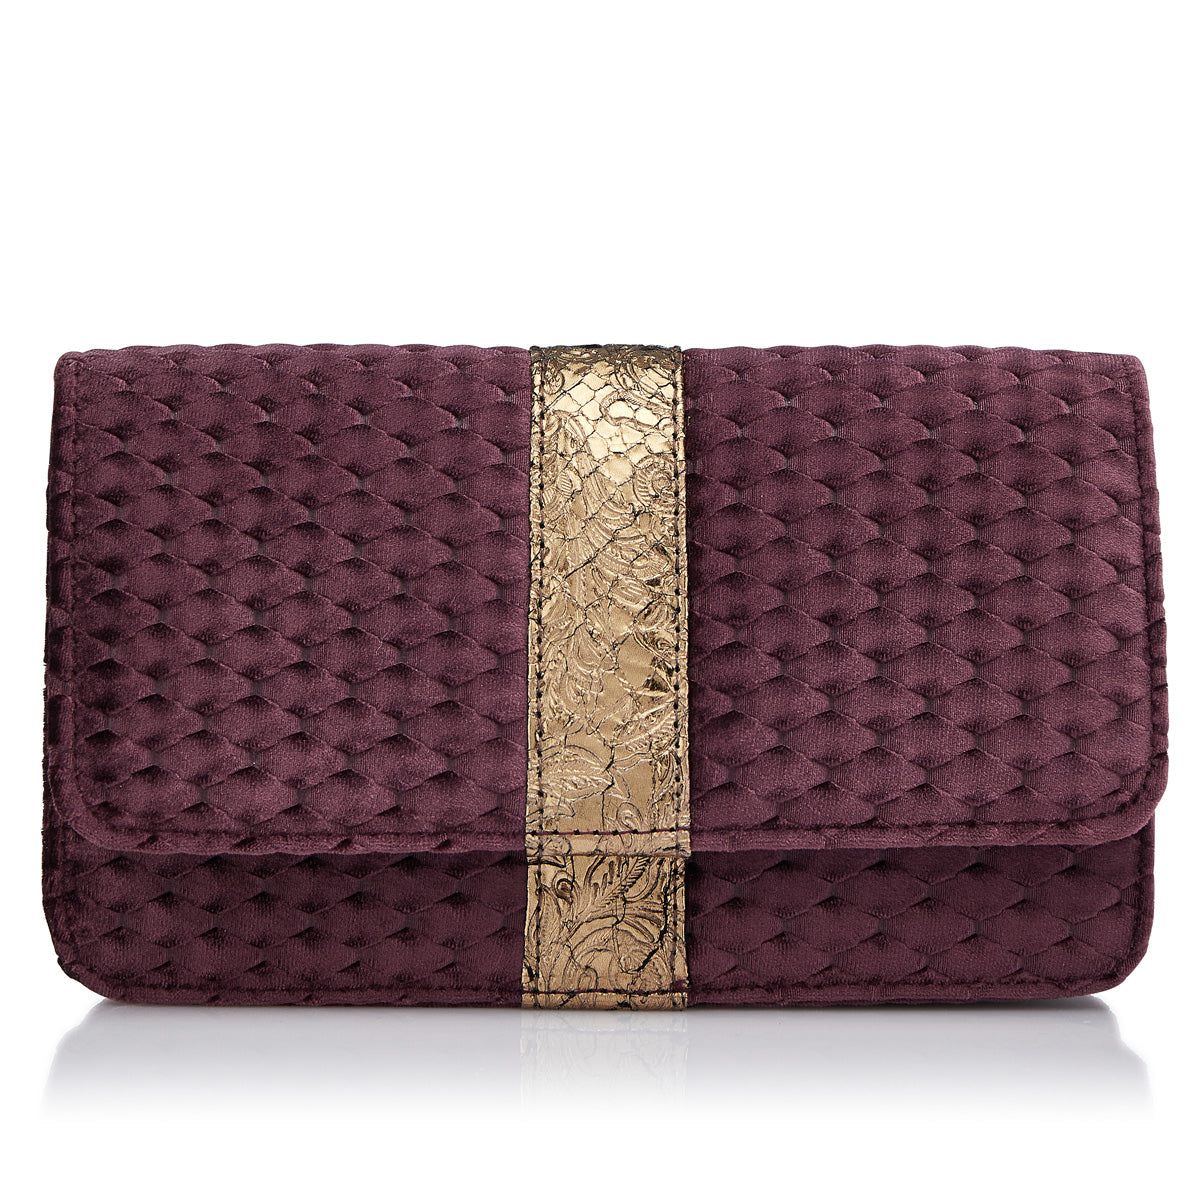 Quilted garnet velvet clutch with scale pattern and old gold brocaded leather